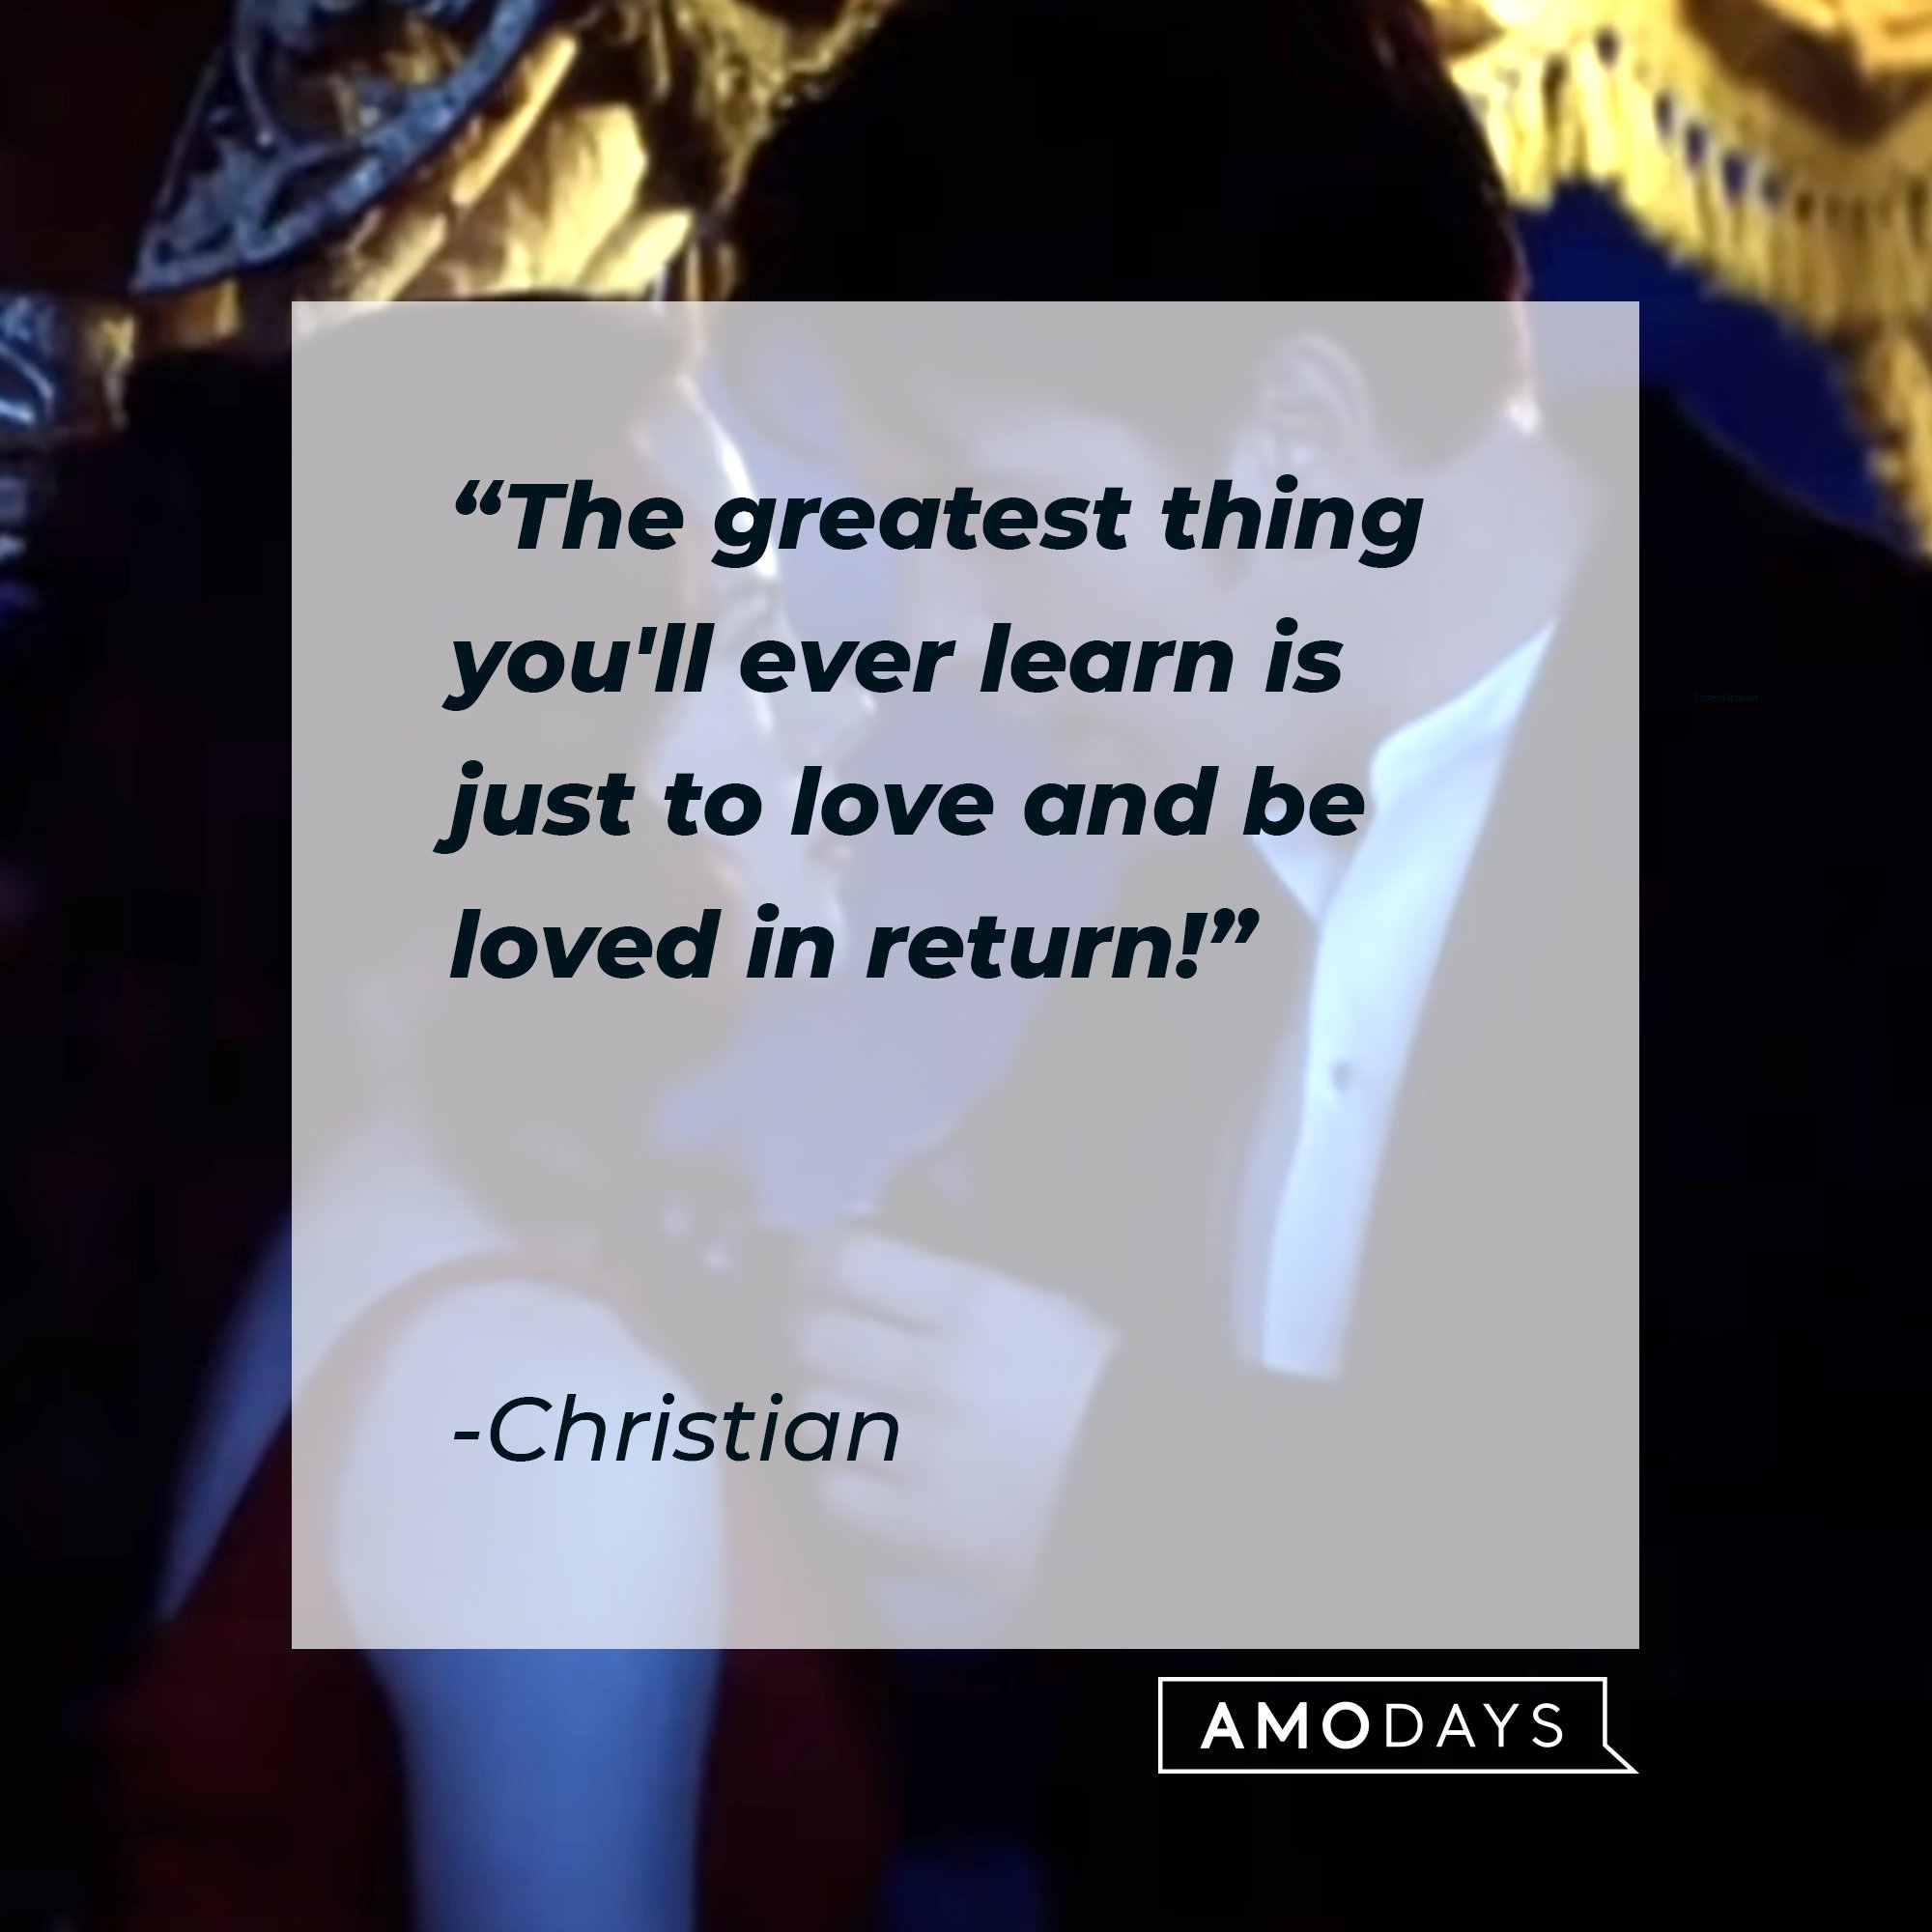   Christian's quote: "The greatest thing you'll ever learn is just to love and be loved in return!" | Image: AmoDays